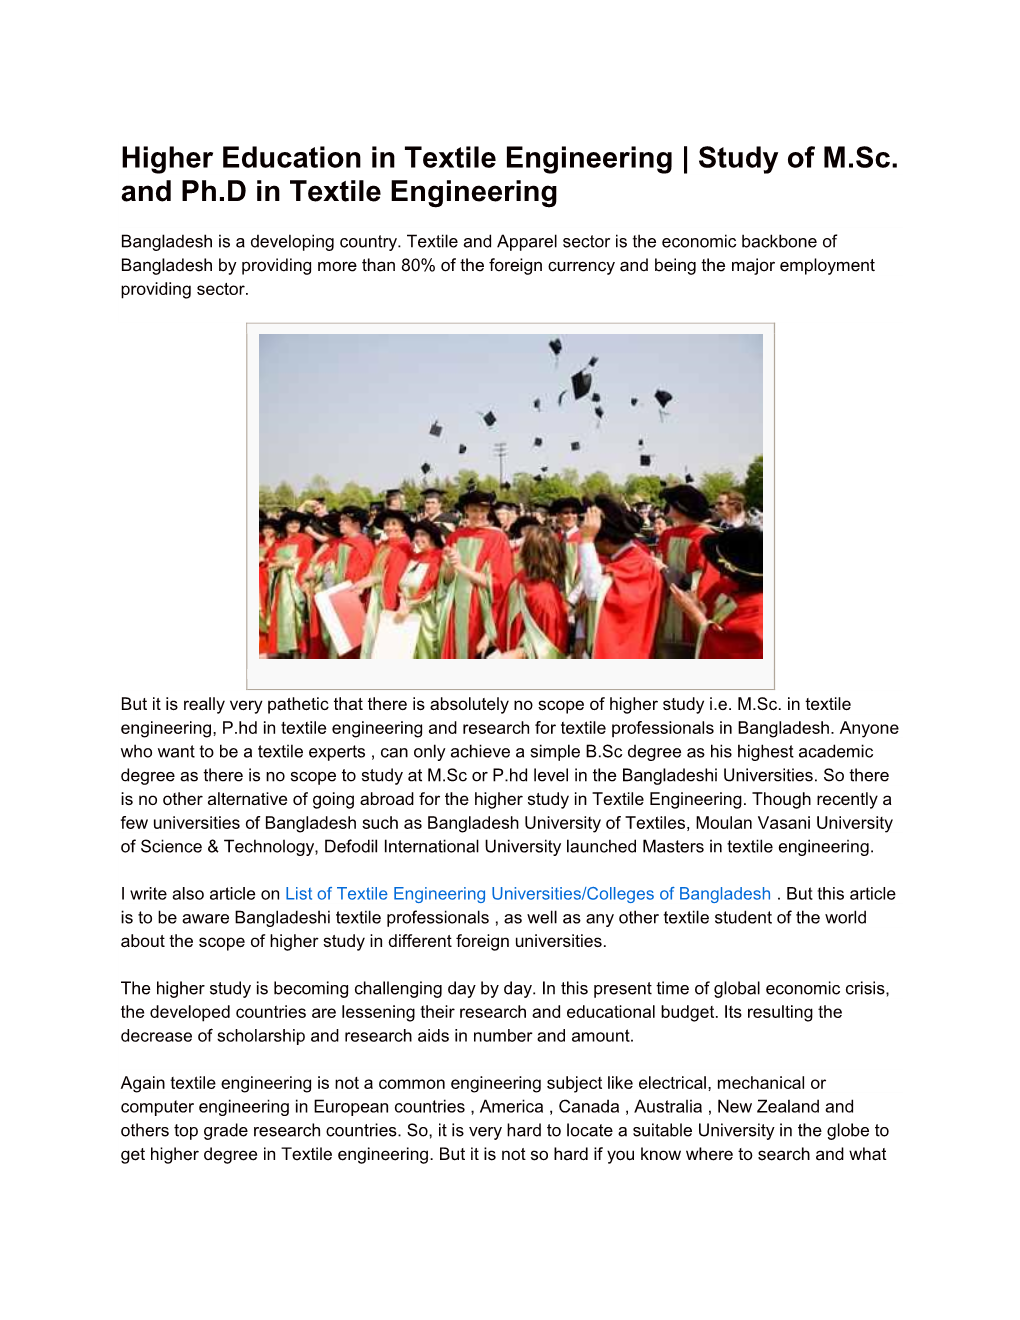 Higher Education in Textile Engineering | Study of M.Sc. and Ph.D in Textile Engineering